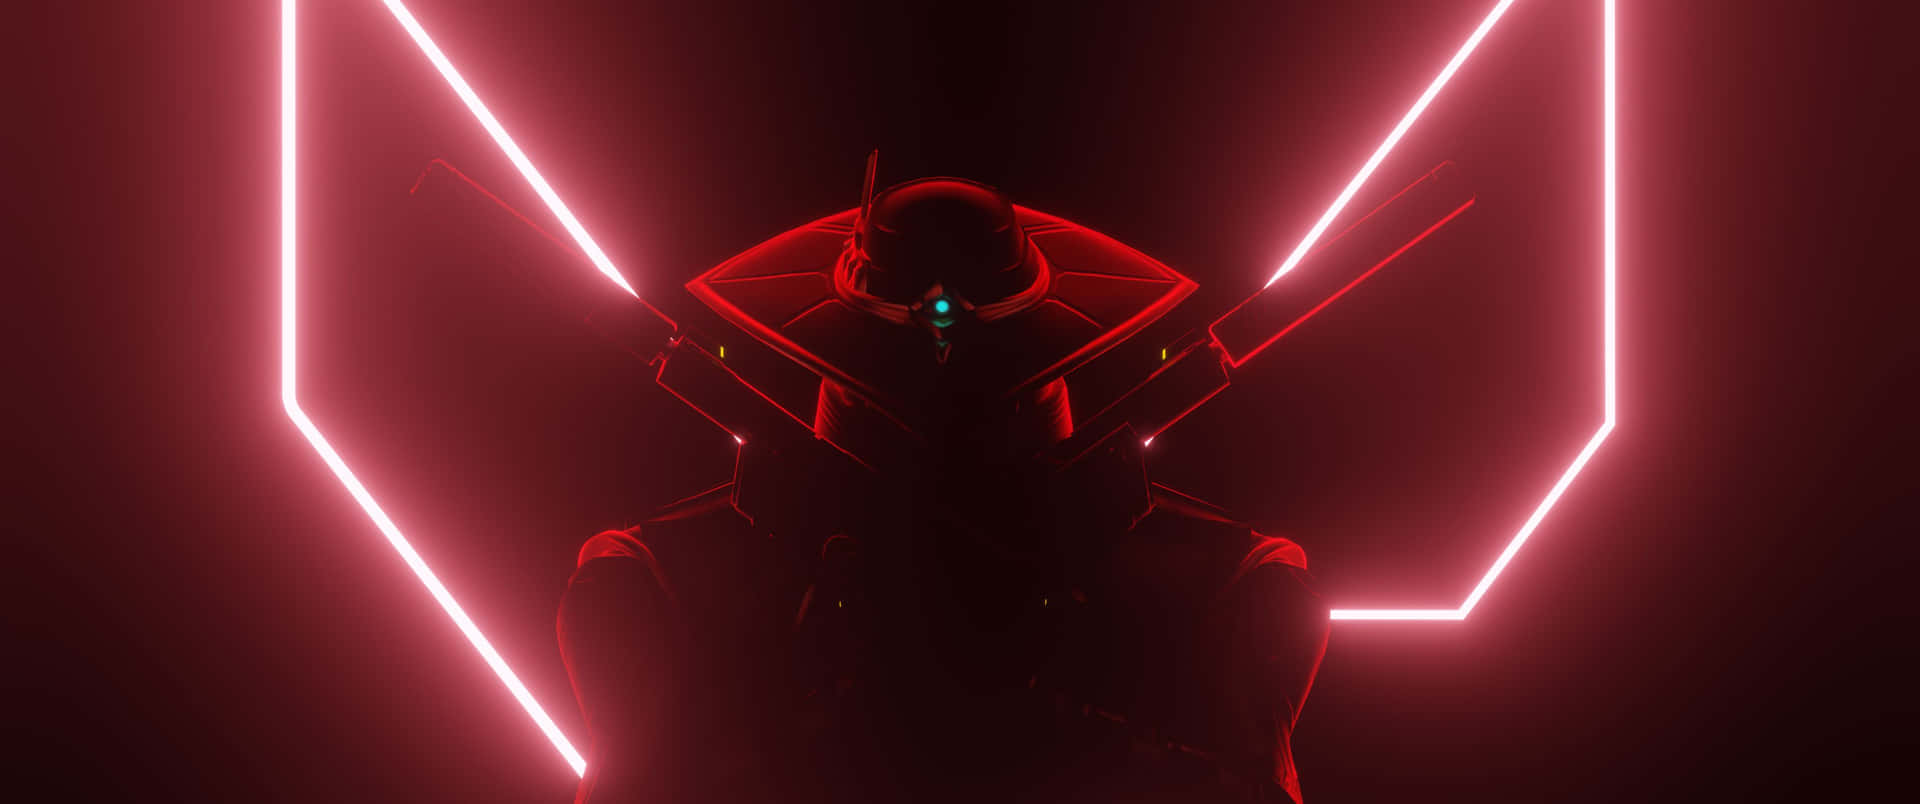 3440x1440p Valorant Cypher Red Background